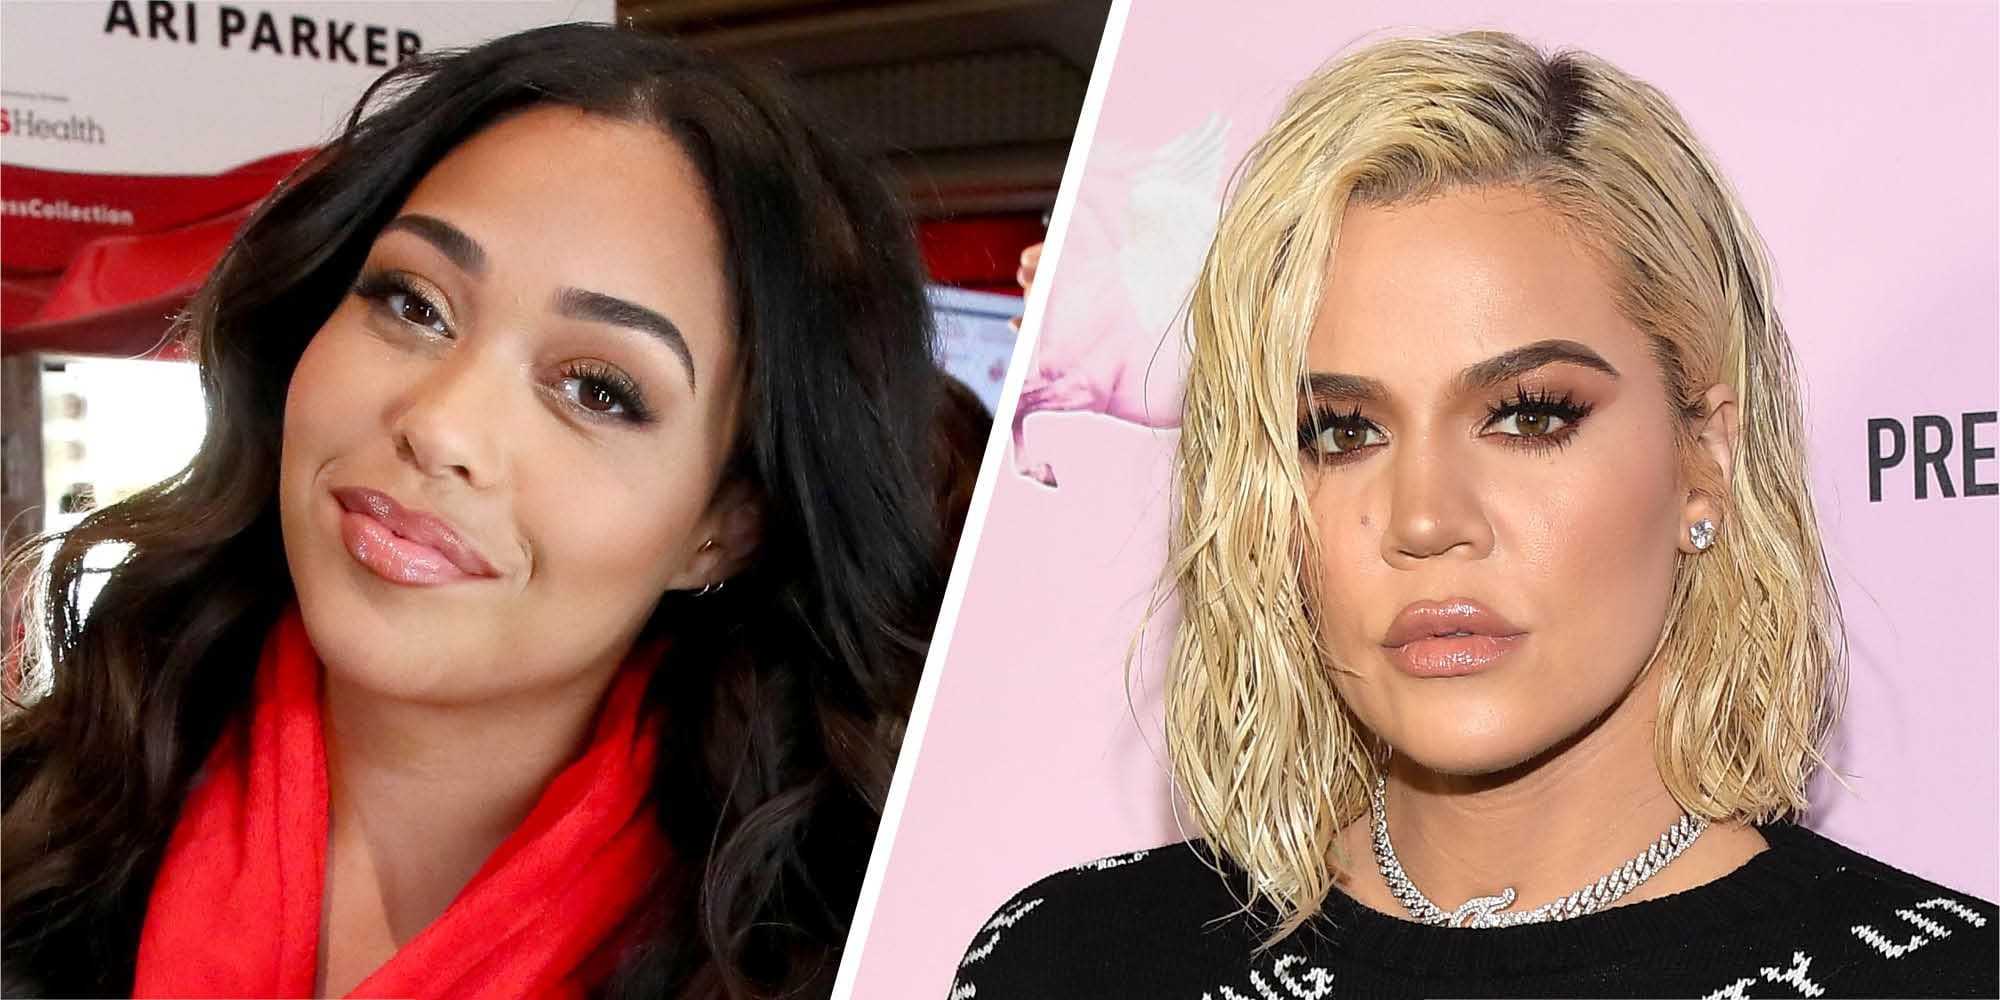 Khloe Kardashian Accuses Jordyn Woods Of Lying In Her Much-Awaited Interview: 'Why Are You Lying?' - Watch The Videos And Read Khloe's Message